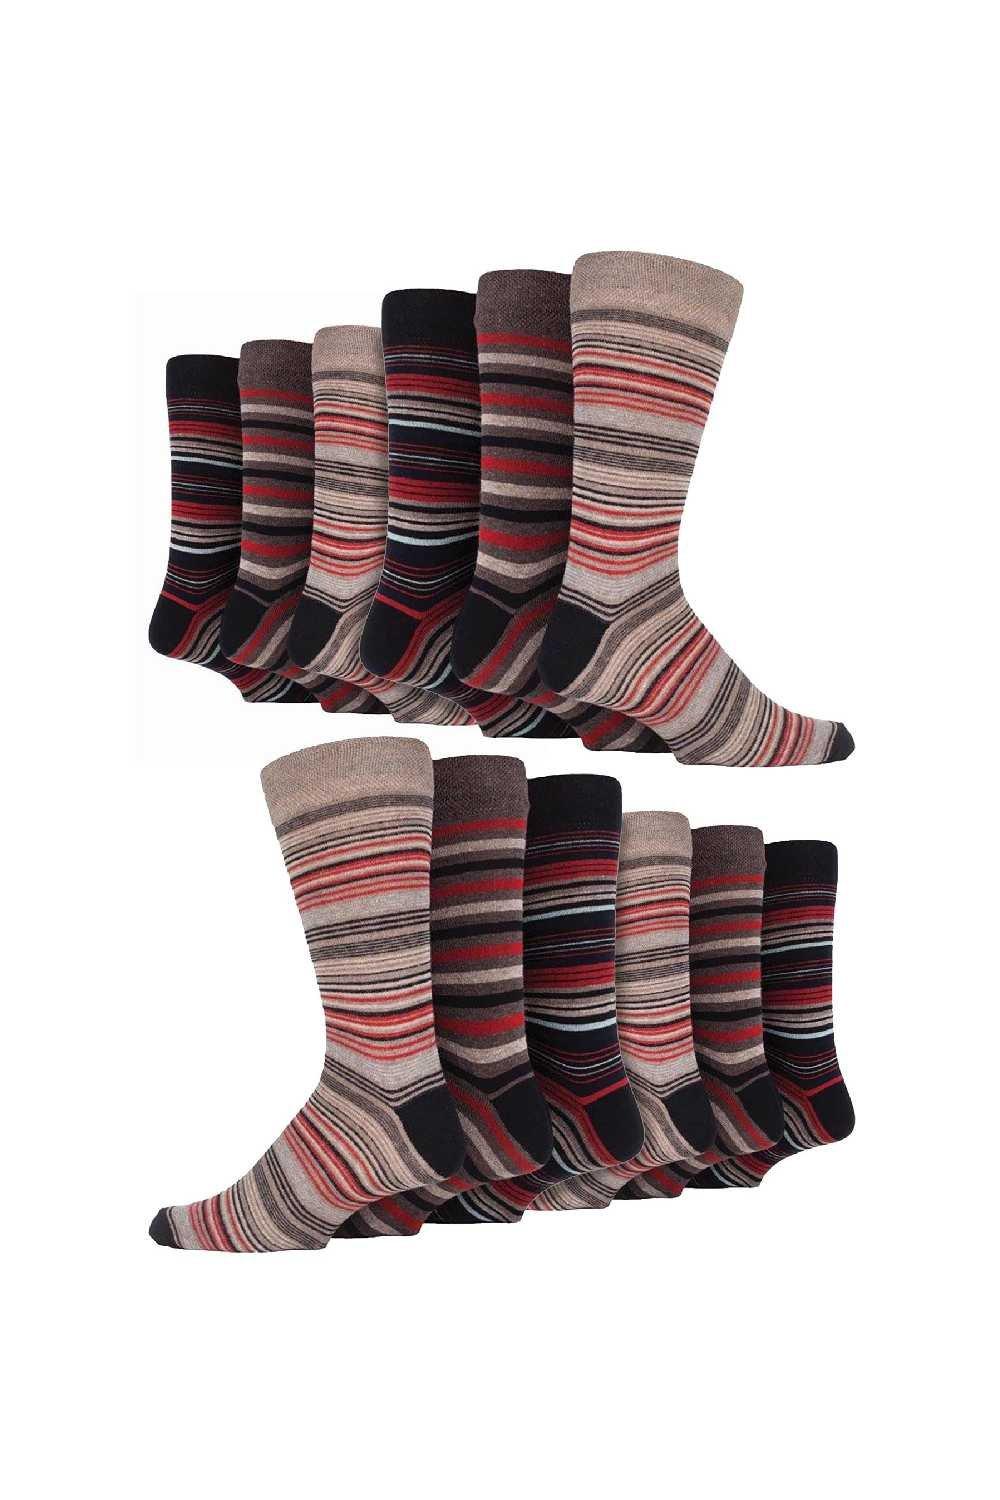 12 Pair Multipack Cotton Colourful Striped Patterned Dress Socks